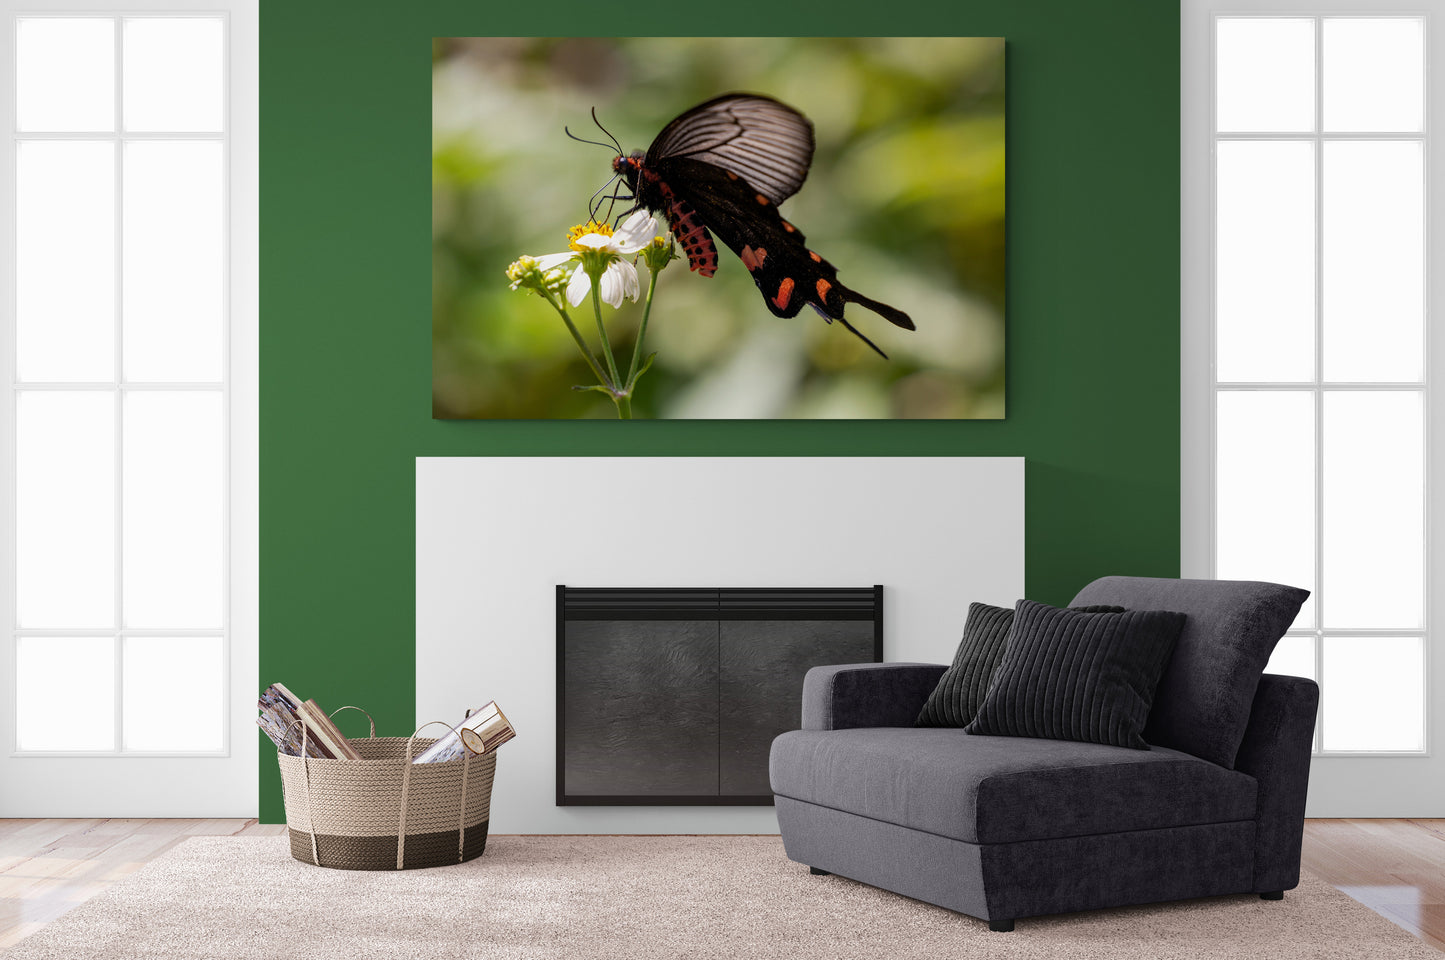 Printed canvas · High quality · Black and red butterfly · Wall art